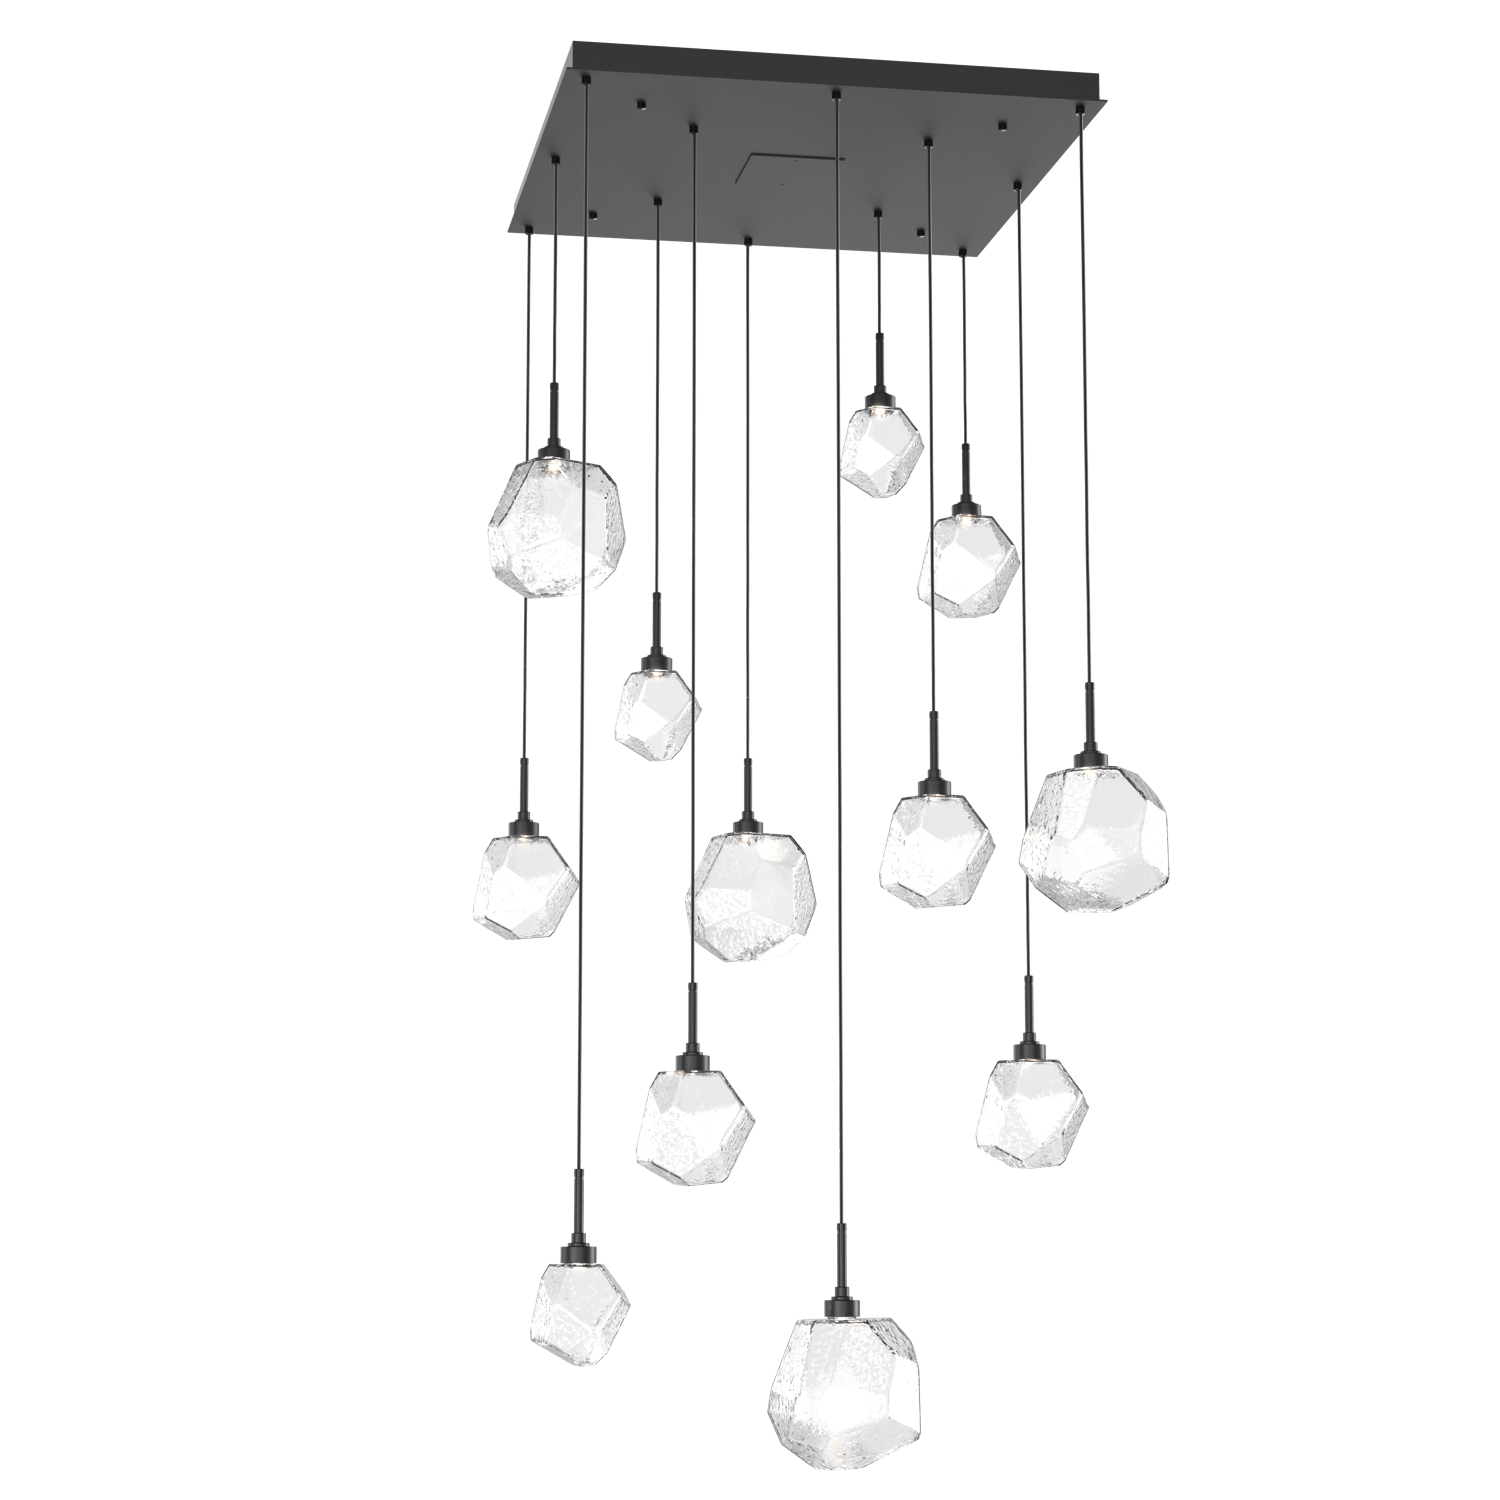 CHB0039-12-MB-C-Hammerton-Studio-Gem-12-light-square-pendant-chandelier-with-matte-black-finish-and-clear-blown-glass-shades-and-LED-lamping